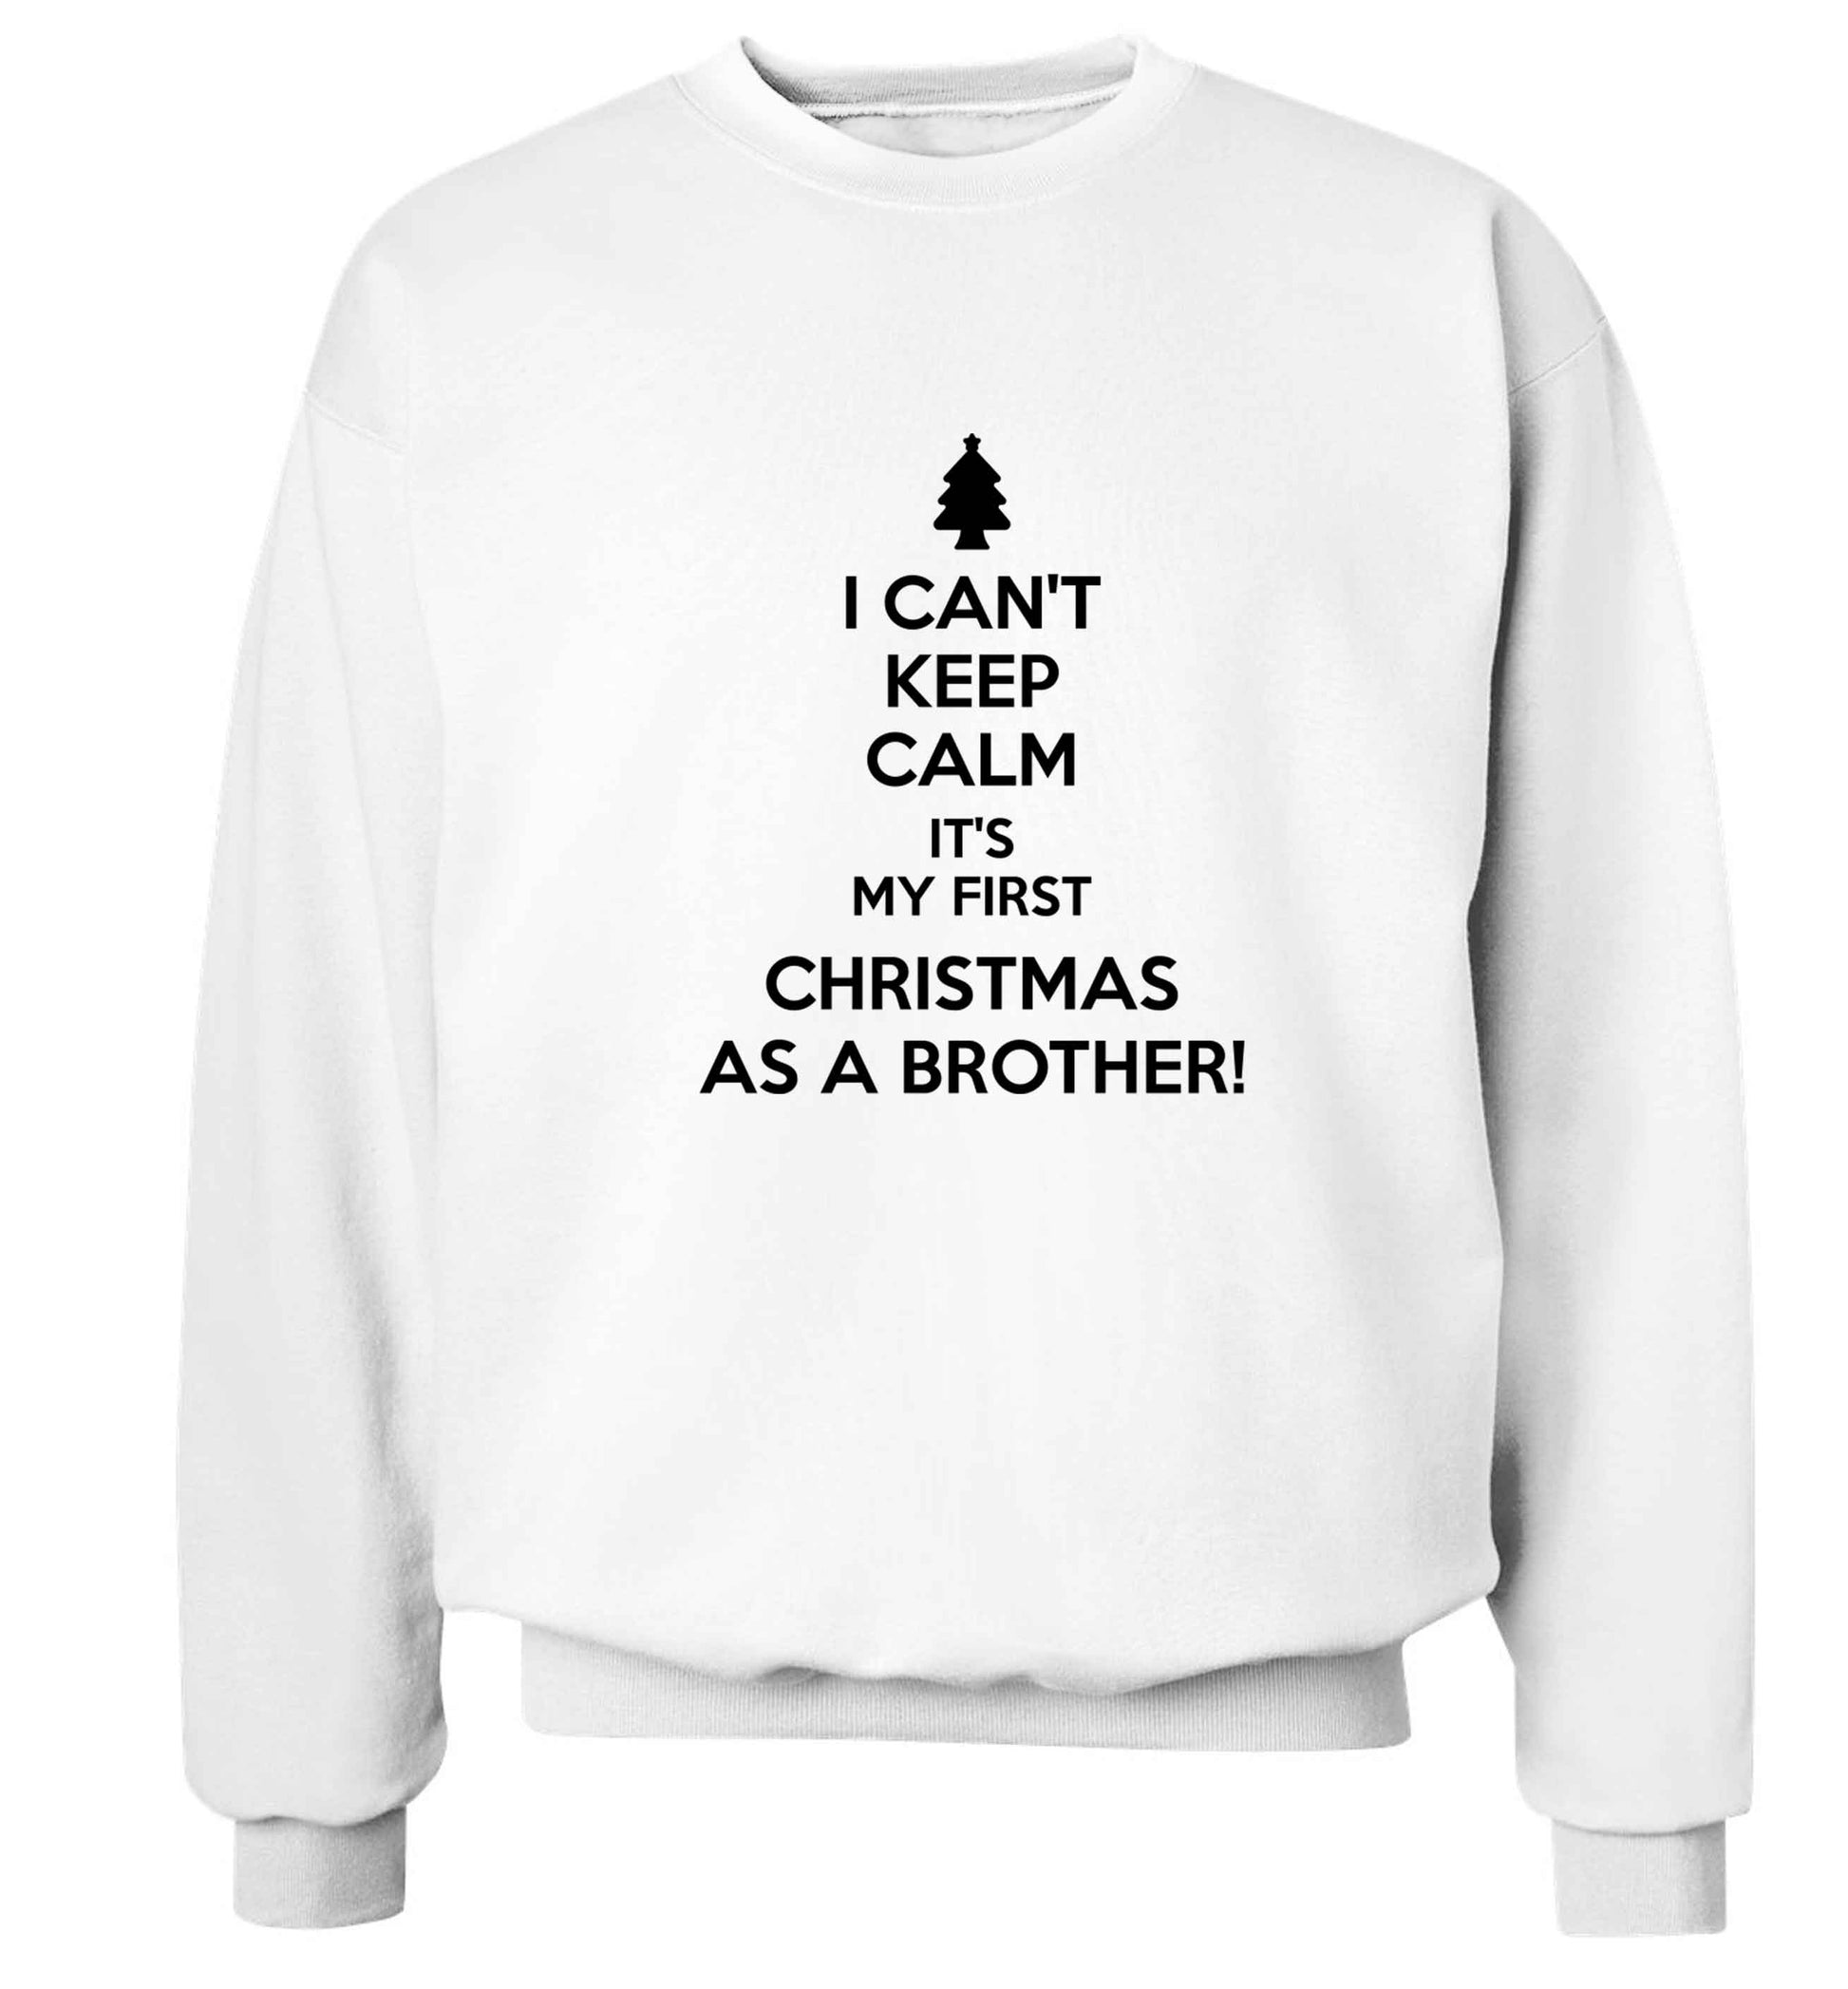 I can't keep calm it's my first Christmas as a brother! Adult's unisex white Sweater 2XL